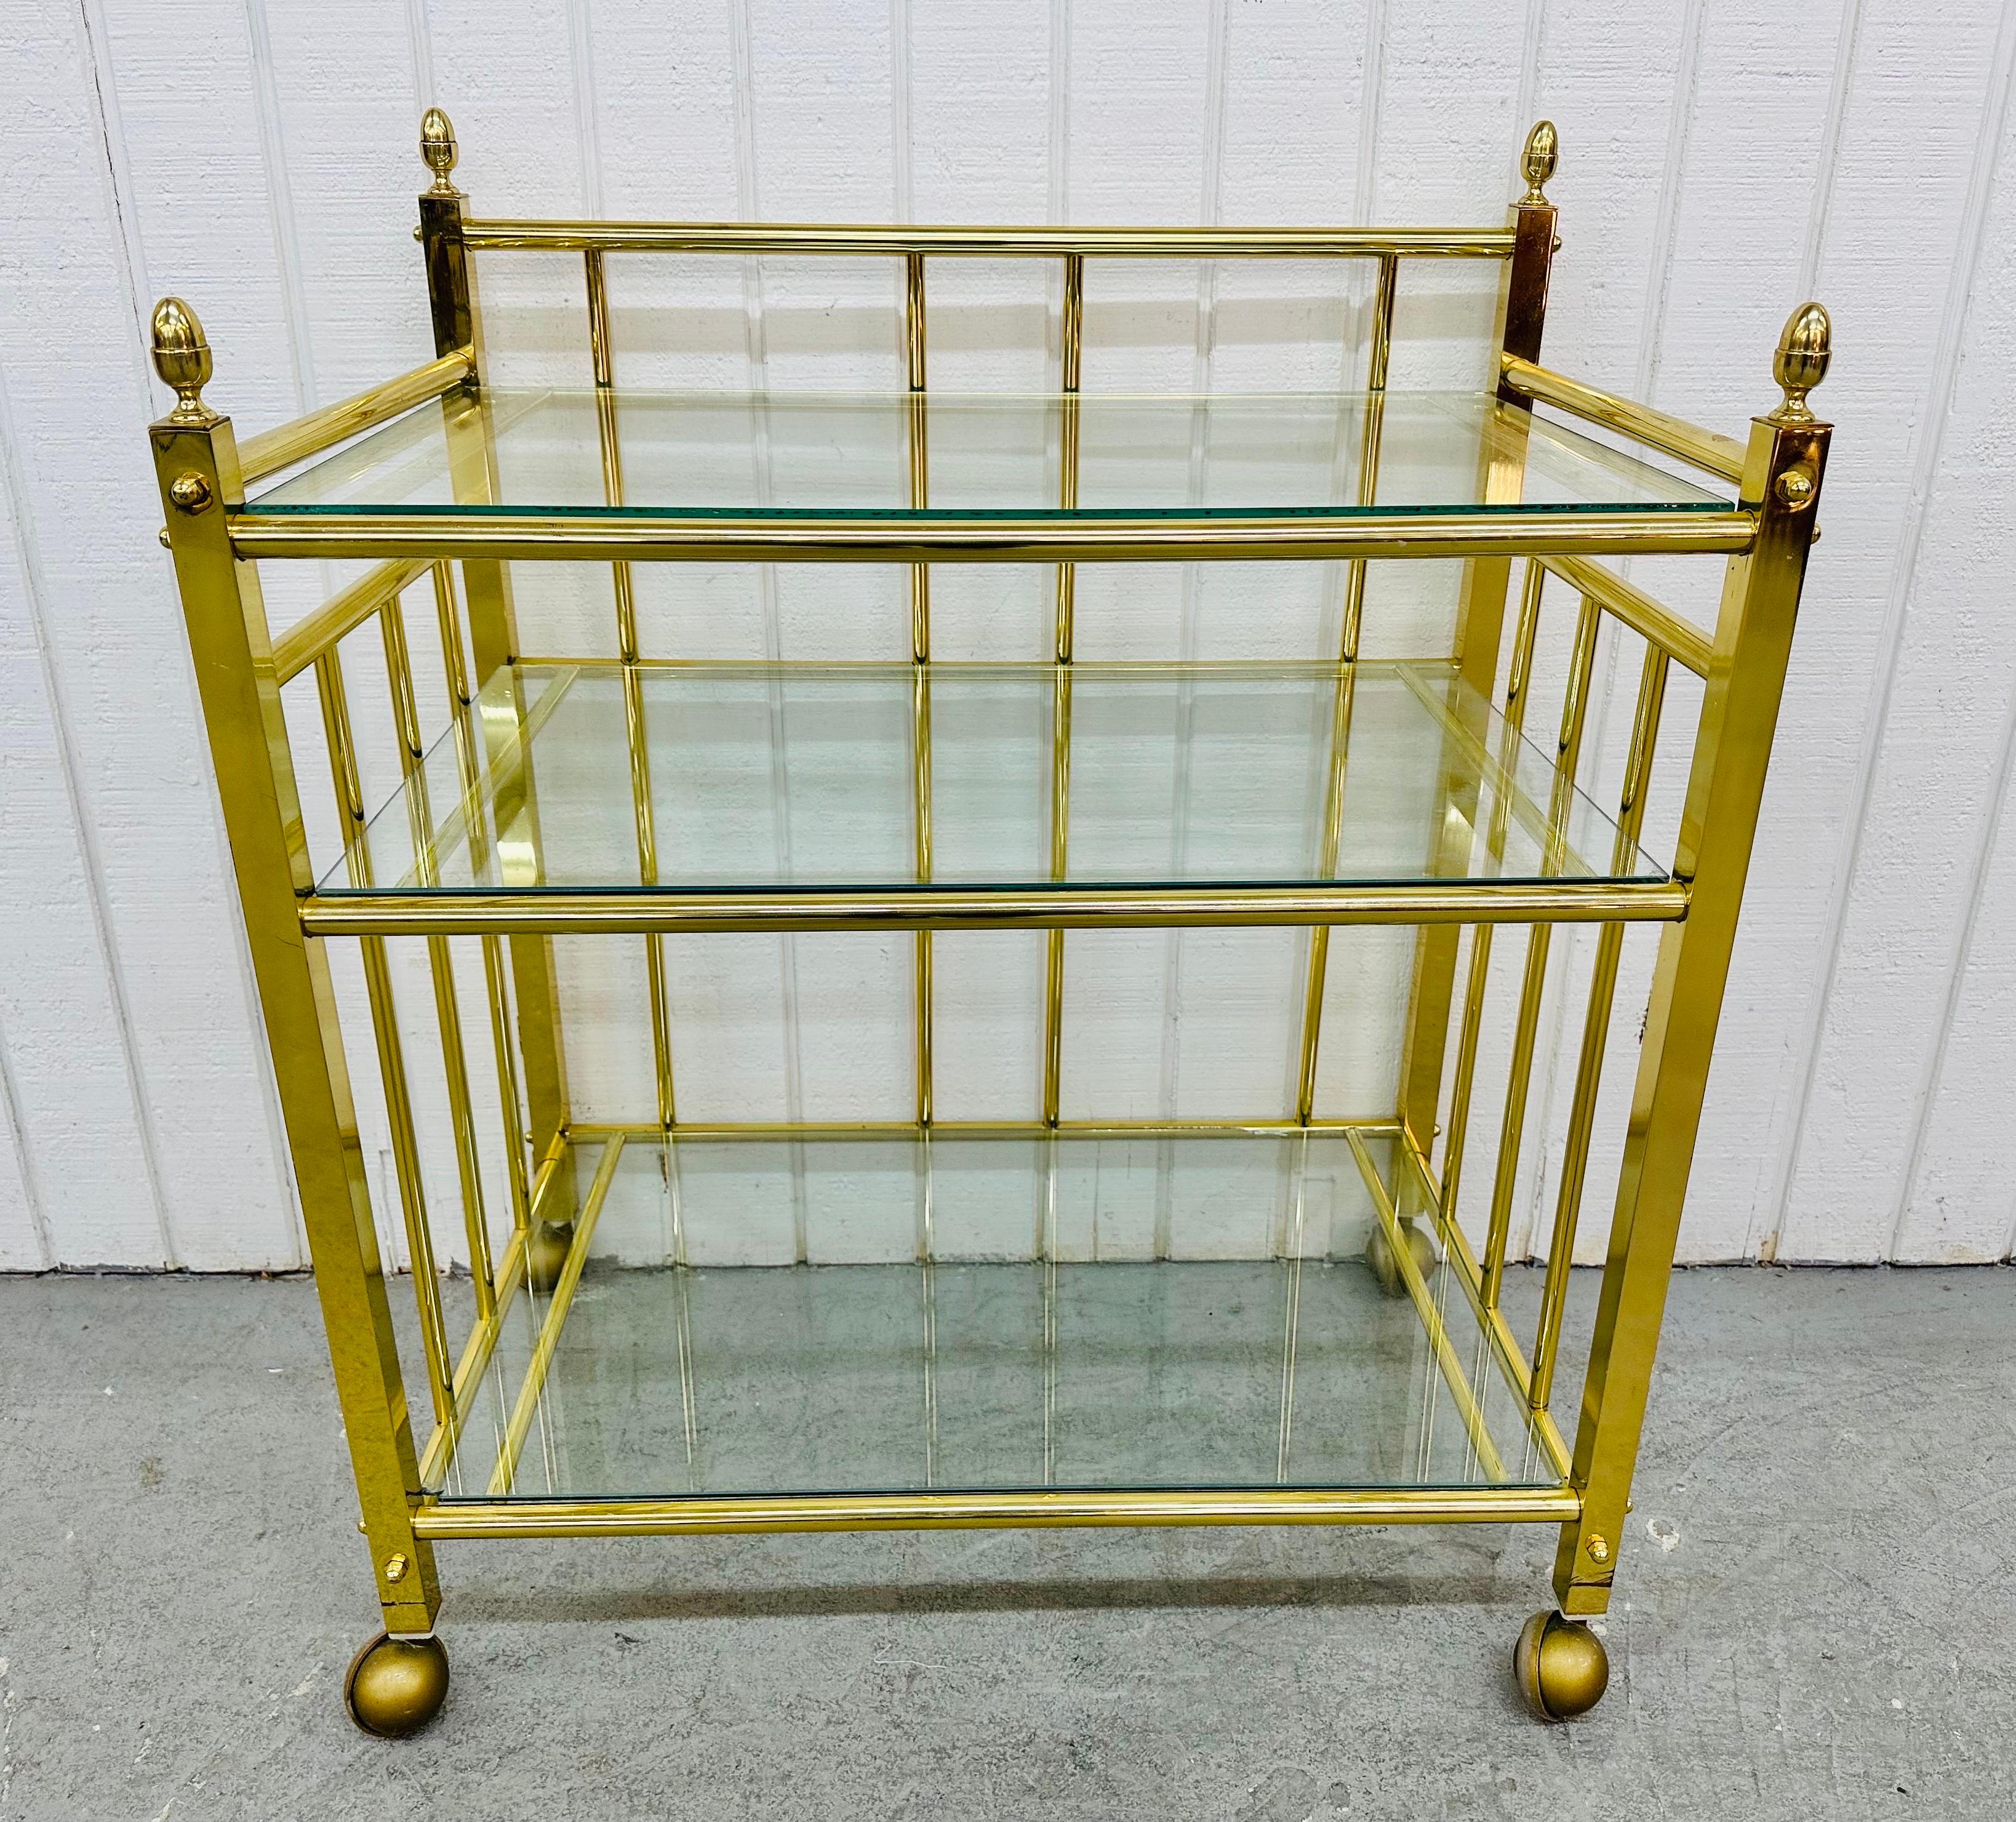 This listing is for a vintage brass and glass bar cart. Featuring a straight line design, brass frame, three glass shelves for storage, wheels for easy transport, and brass finials! This is an exceptional combination of quality and design!